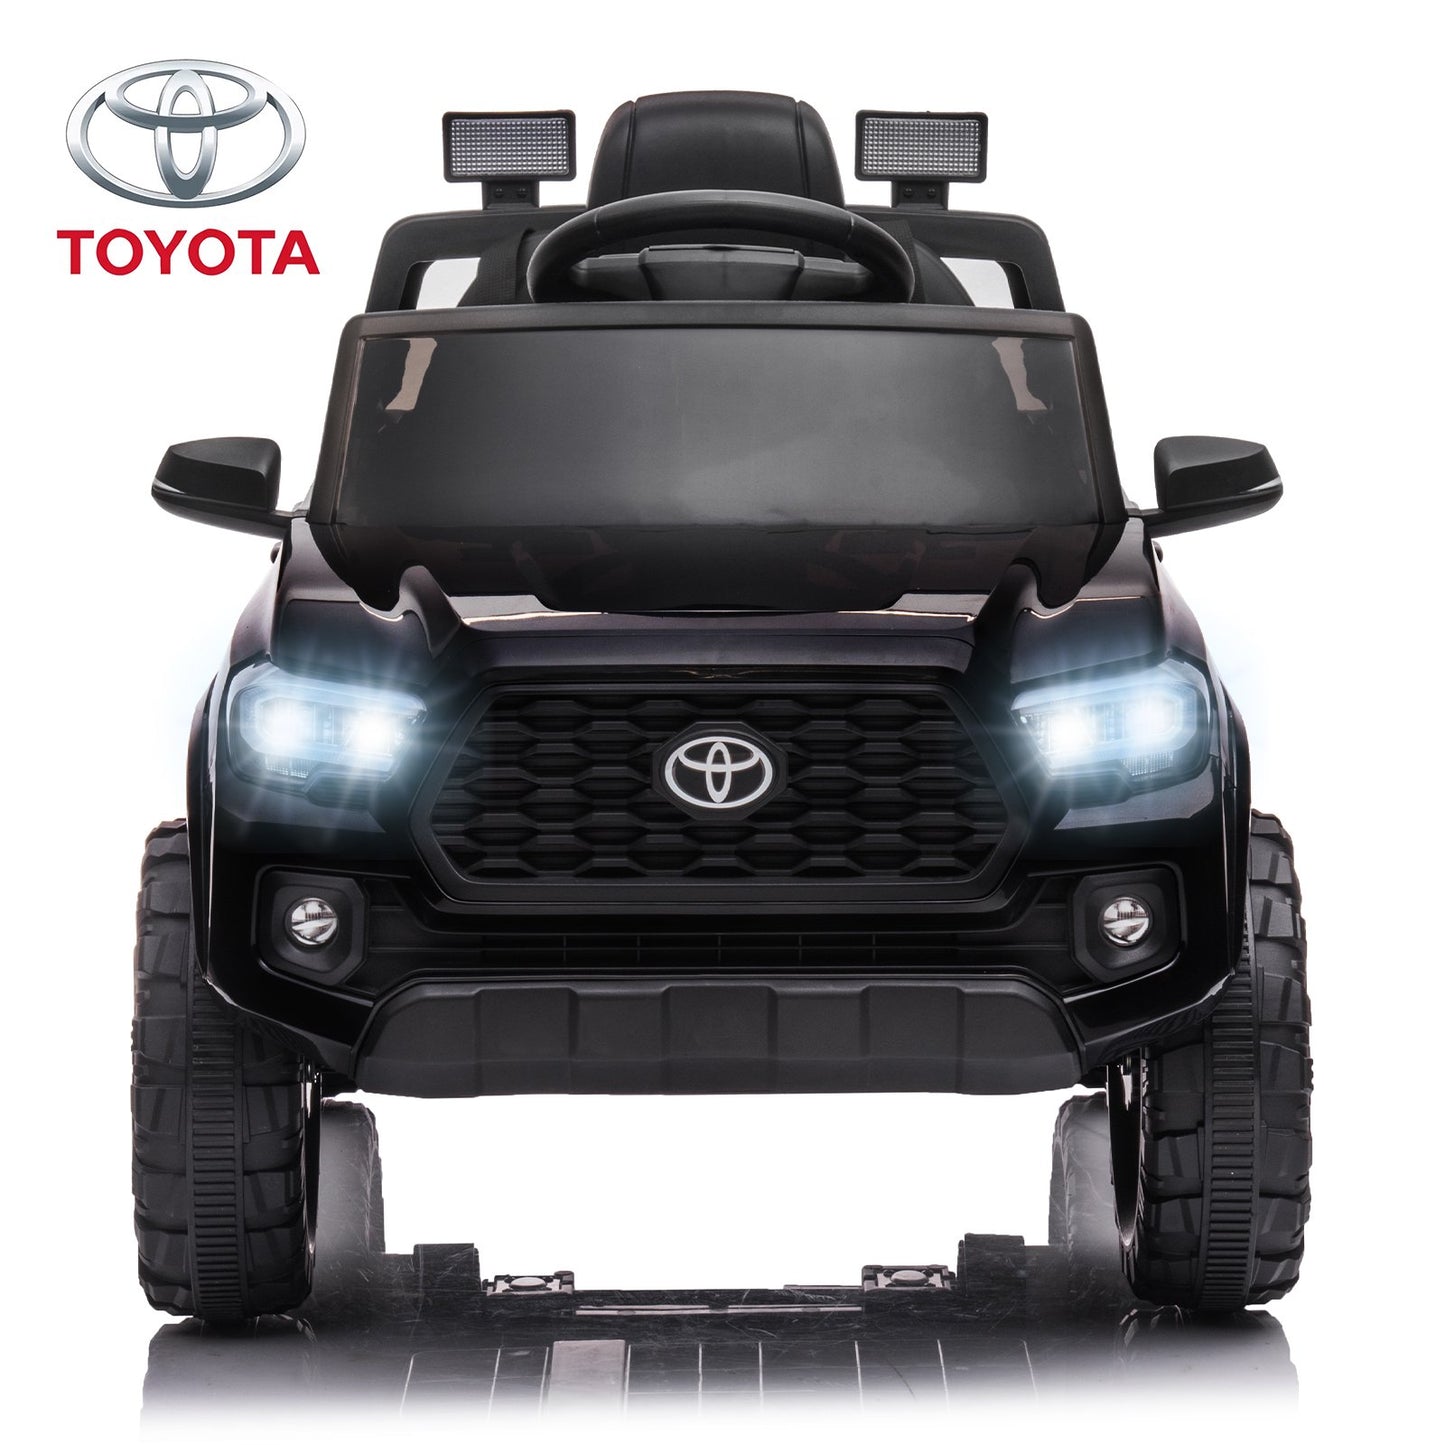 12V Kids Ride on Car, Licensed Toyota Electric Vehicles, Battery Powered Boys Girls Toddlers Toy Car Christmas Gift w/ 2.4 Remote, MP3 Player, Headlights